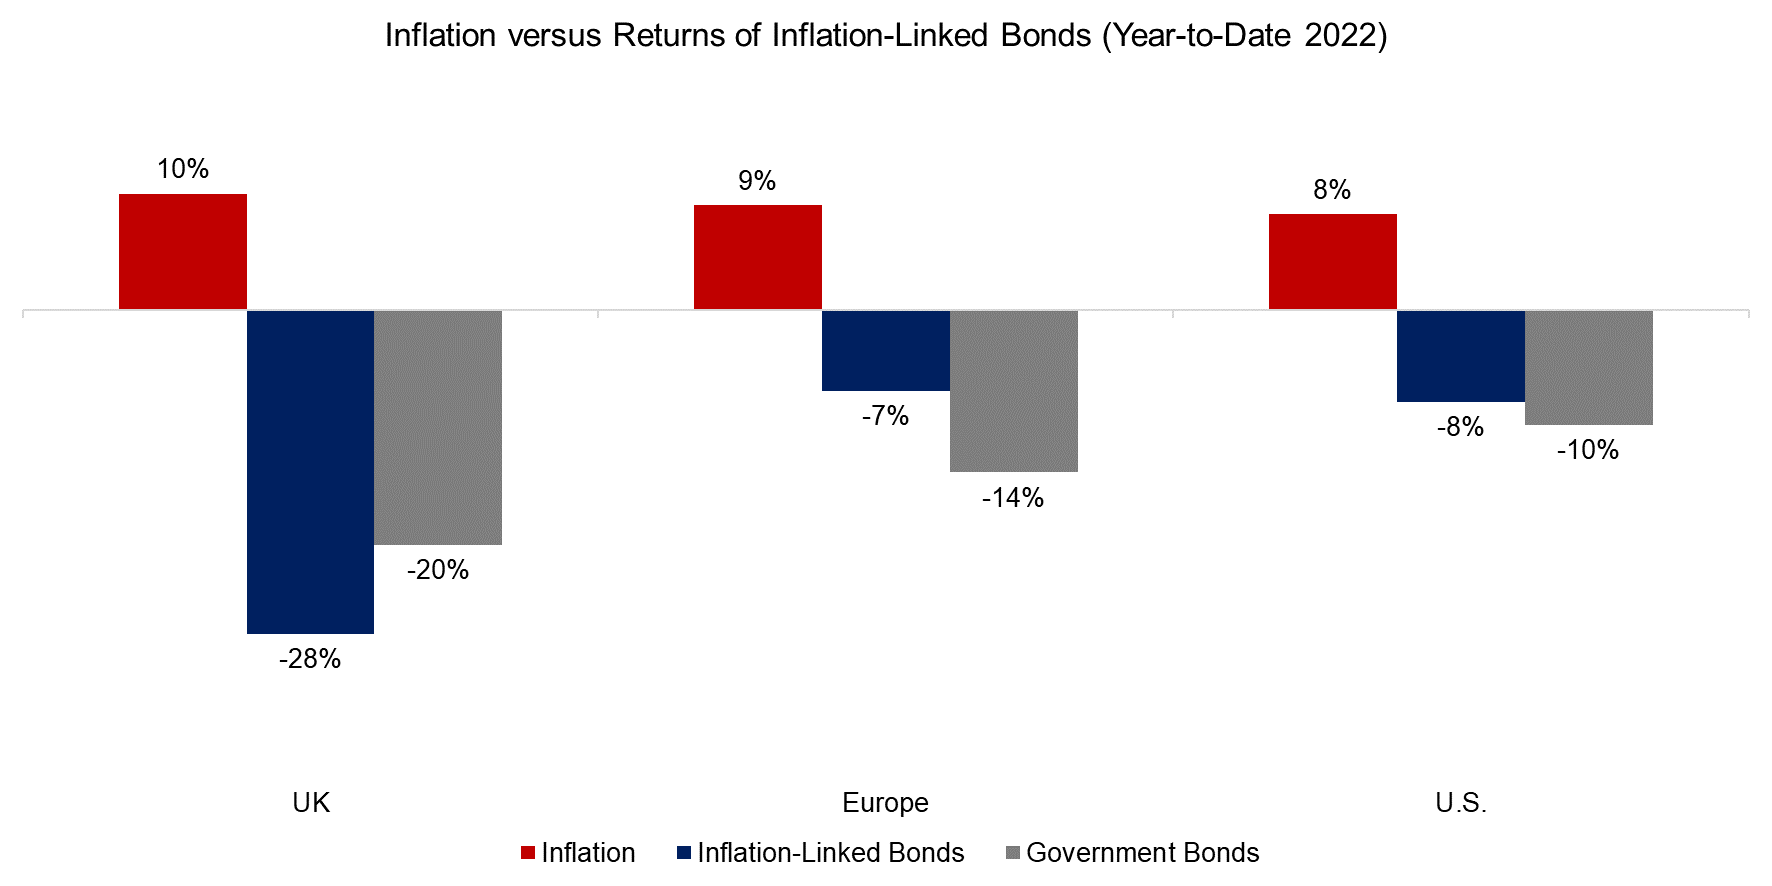 Inflation versus Returns of Inflation-Linked Bonds (Year-to-Date 2022)